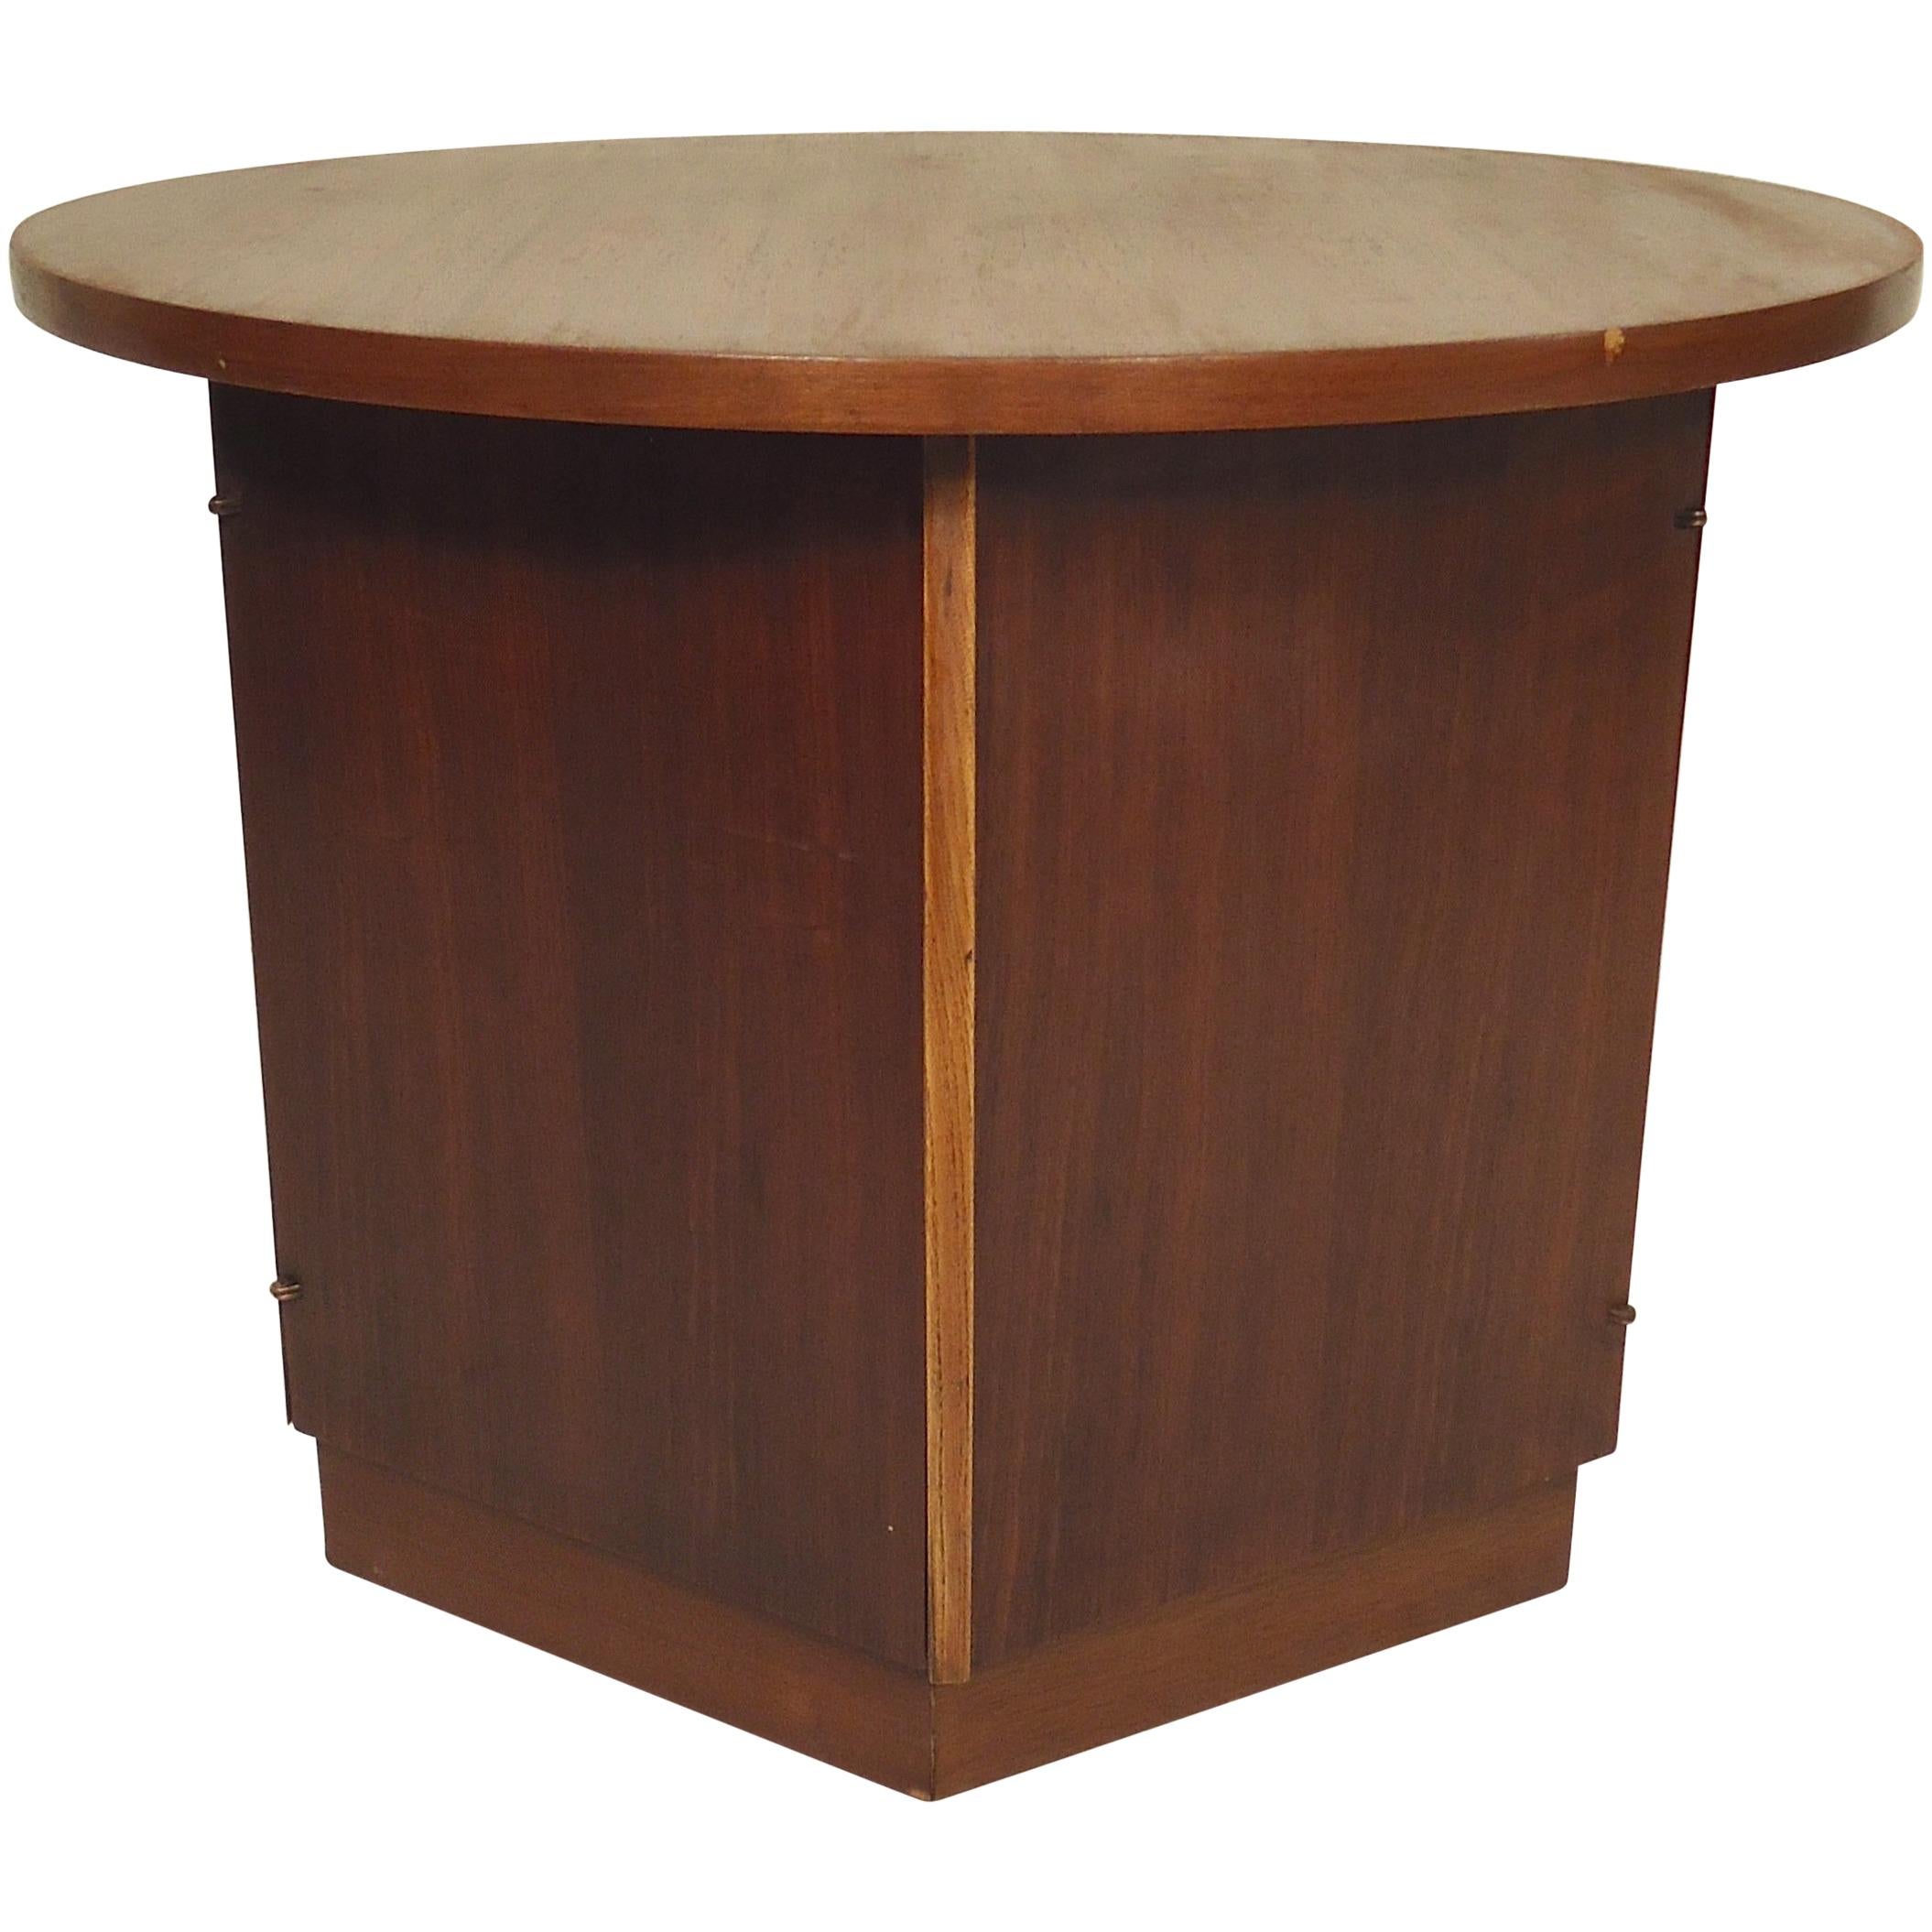 Midcentury Round Side Table with Storage